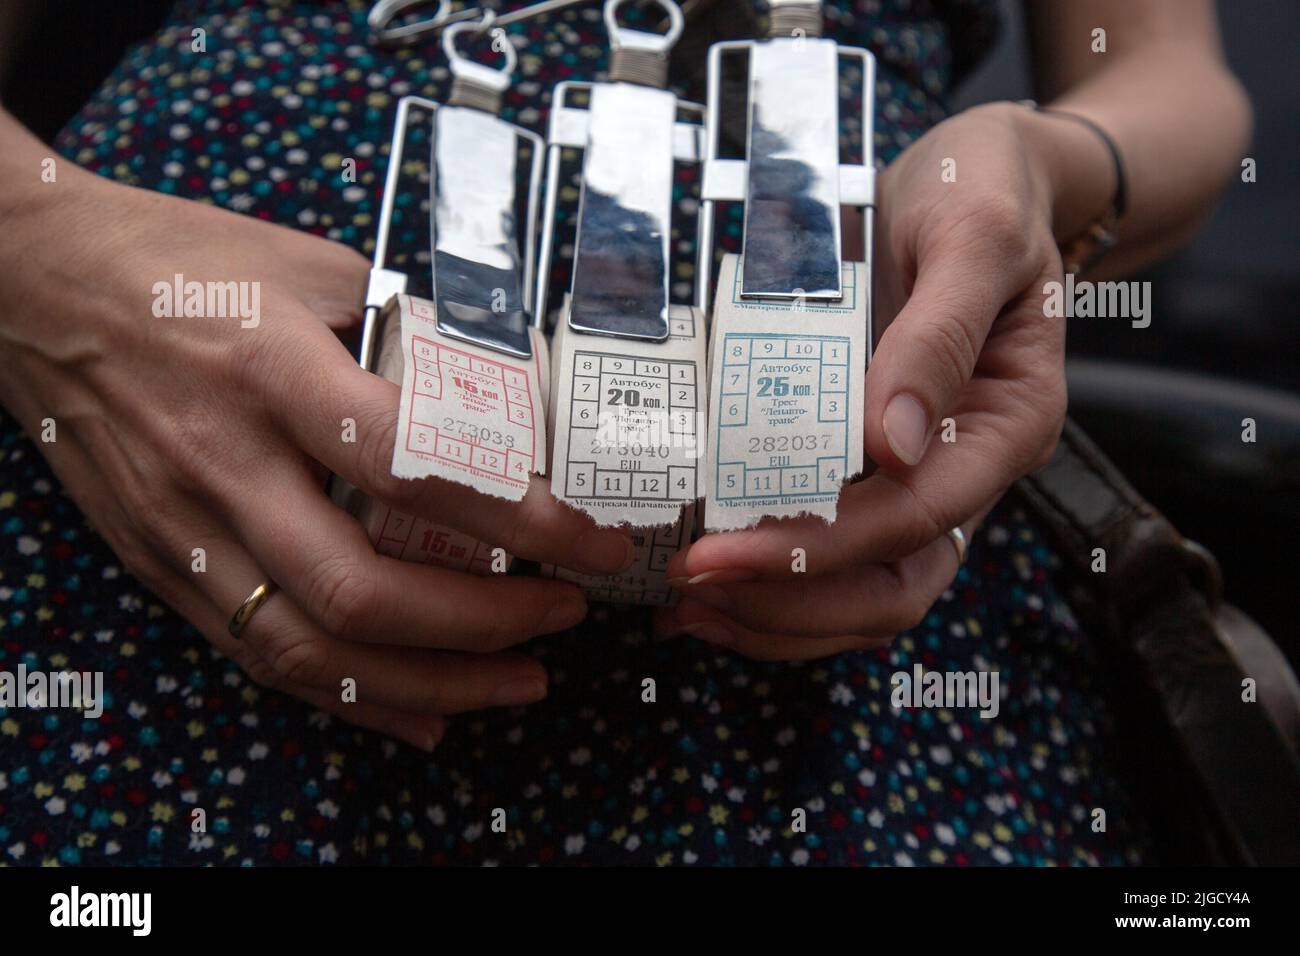 A bus conductor holds Soviet-style tickets for traveling on a bus in Moscow, Russia Stock Photo